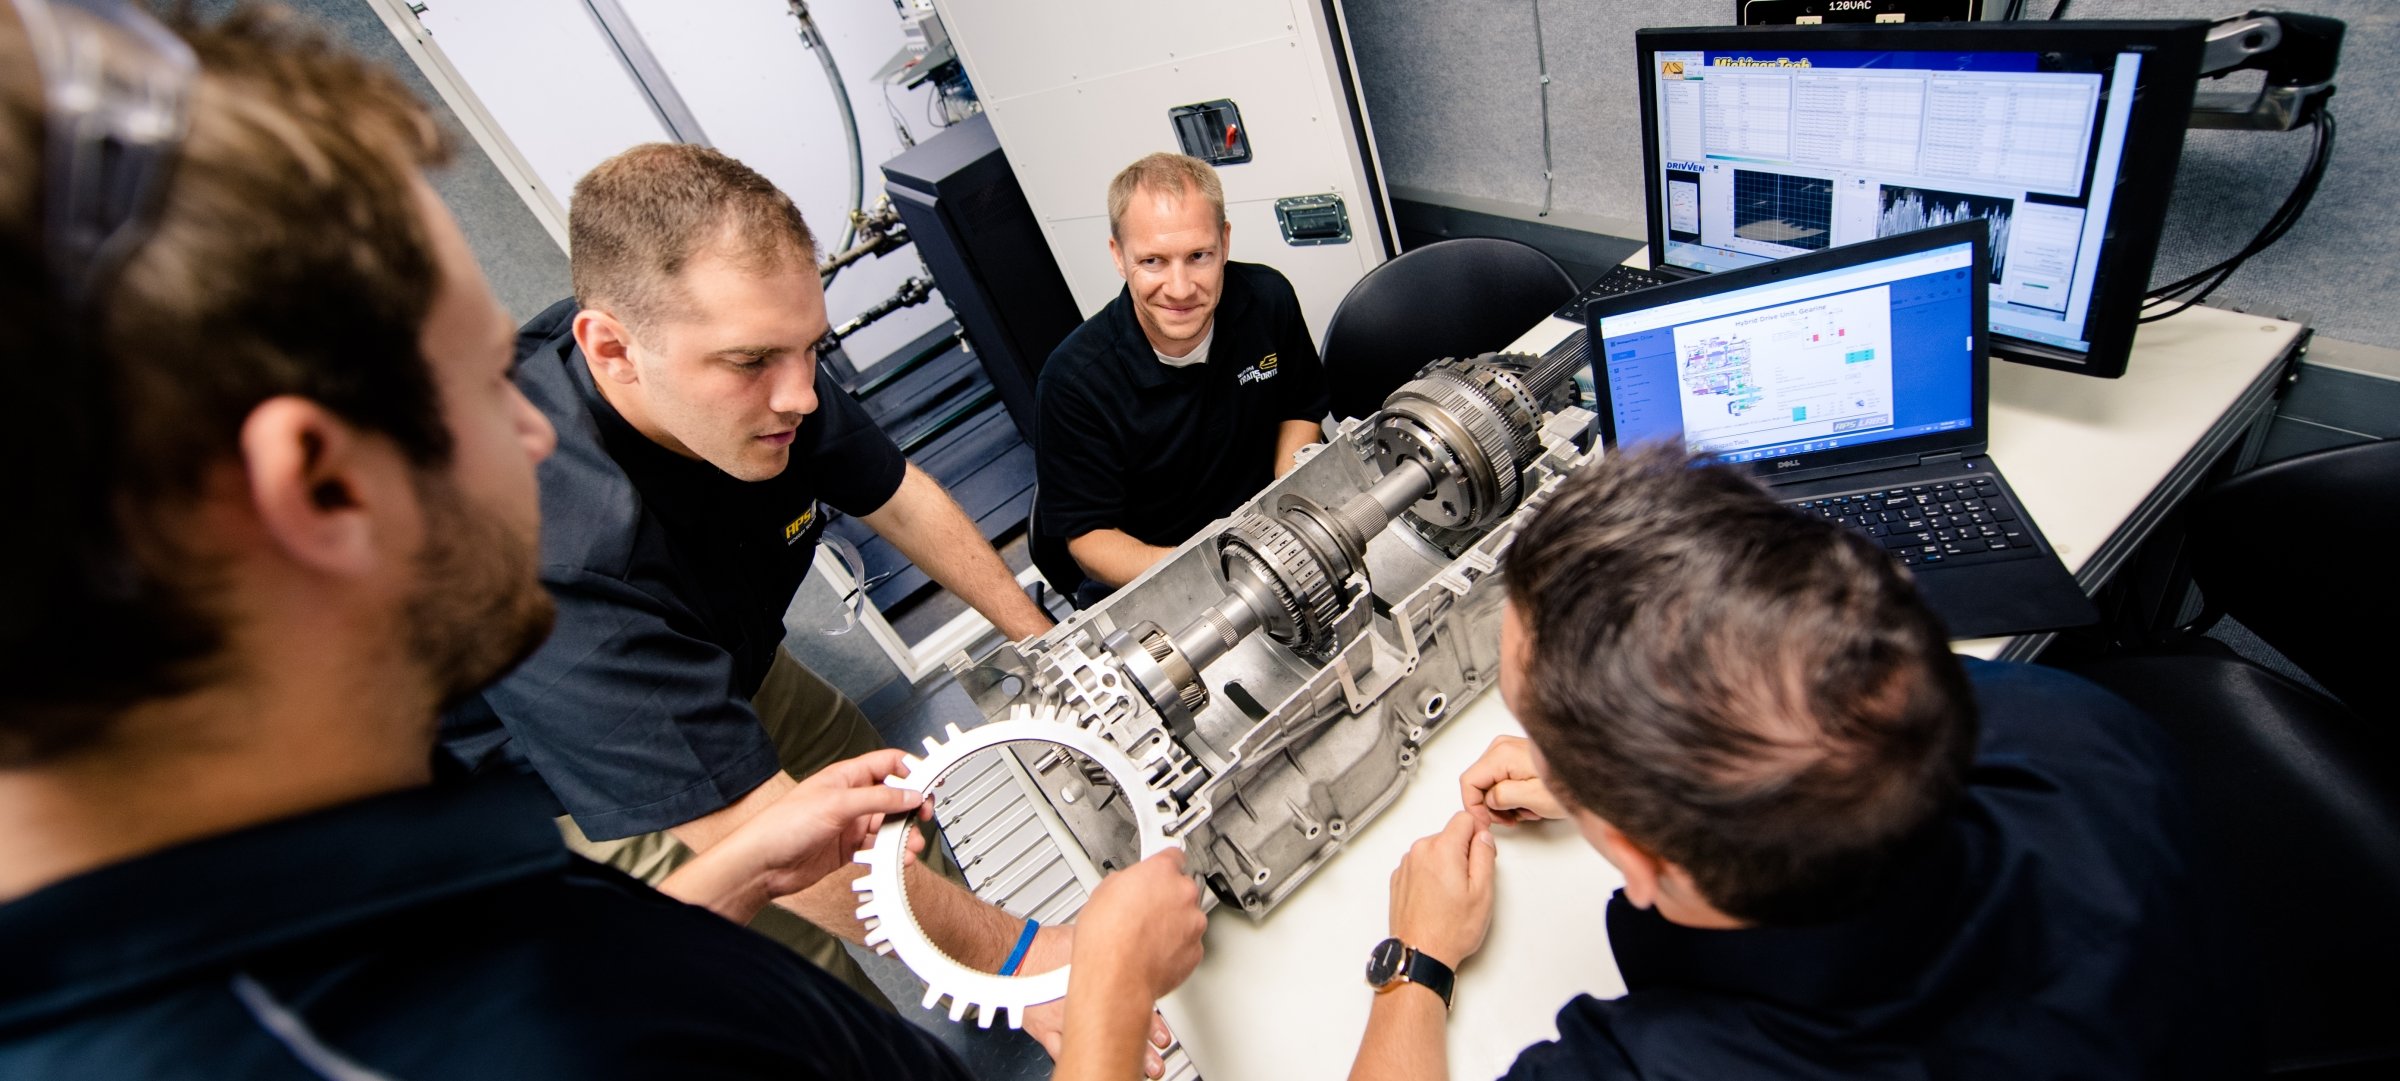 Automotive systems controls students.